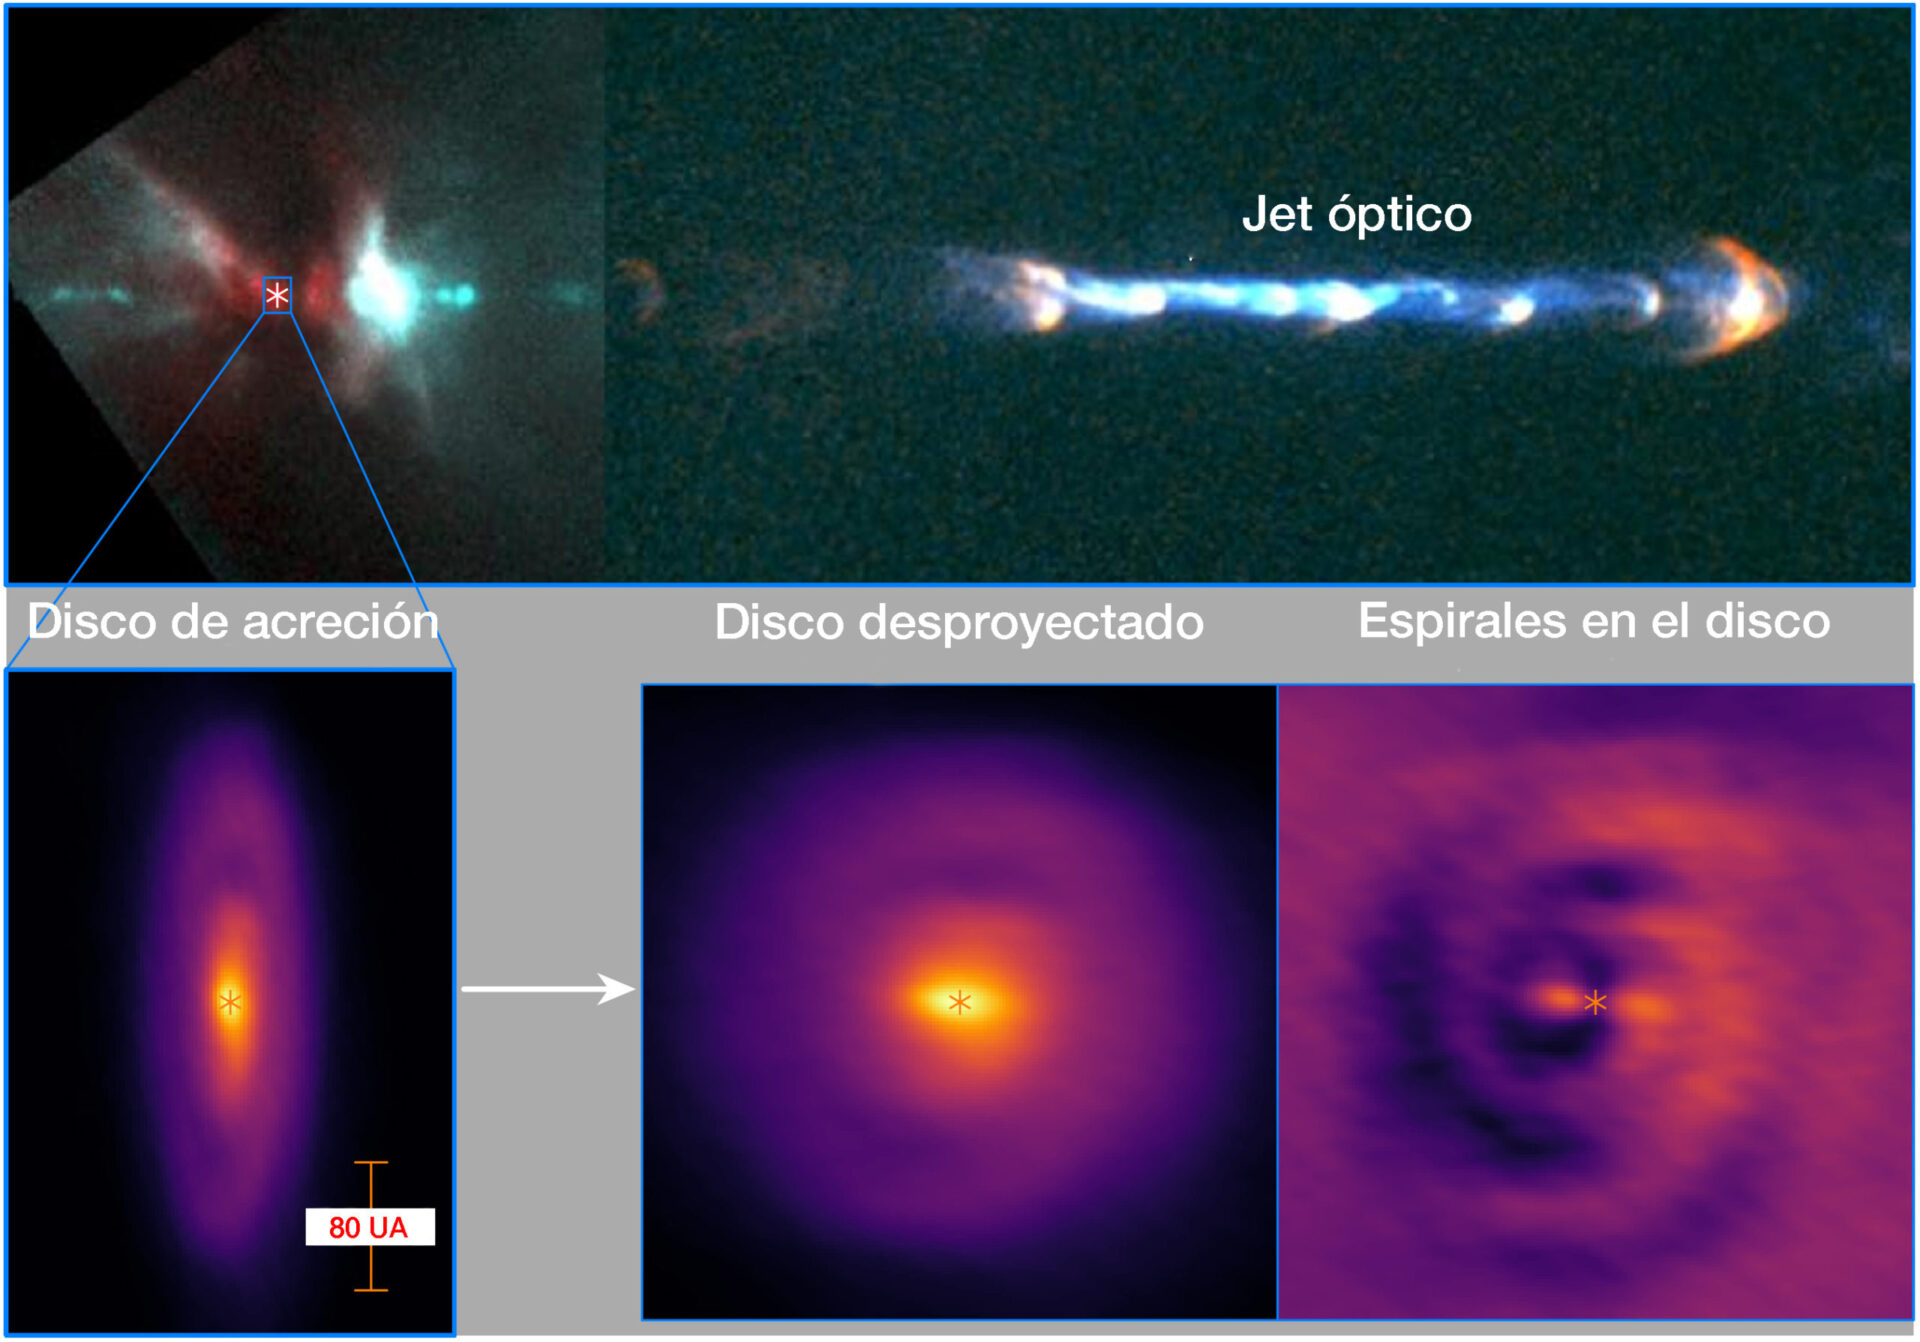 <p>(Top) Optical image of the jet in the HH 111 protostellar system taken by the Hubble Space Telescope (Reipurth et al. 1999). (Bottom left) Accretion disk detected with ALMA in dust continuum emission at 850 micron. (Bottom middle) The disk turned (de-projected) to be face-on, showing a pair of faint spirals. (Bottom right) Annularly averaged continuum emission is subtracted to highlight the faint spirals in the disk. Credit: ALMA (ESO/NAOJ/NRAO)/Lee et al.</p>
